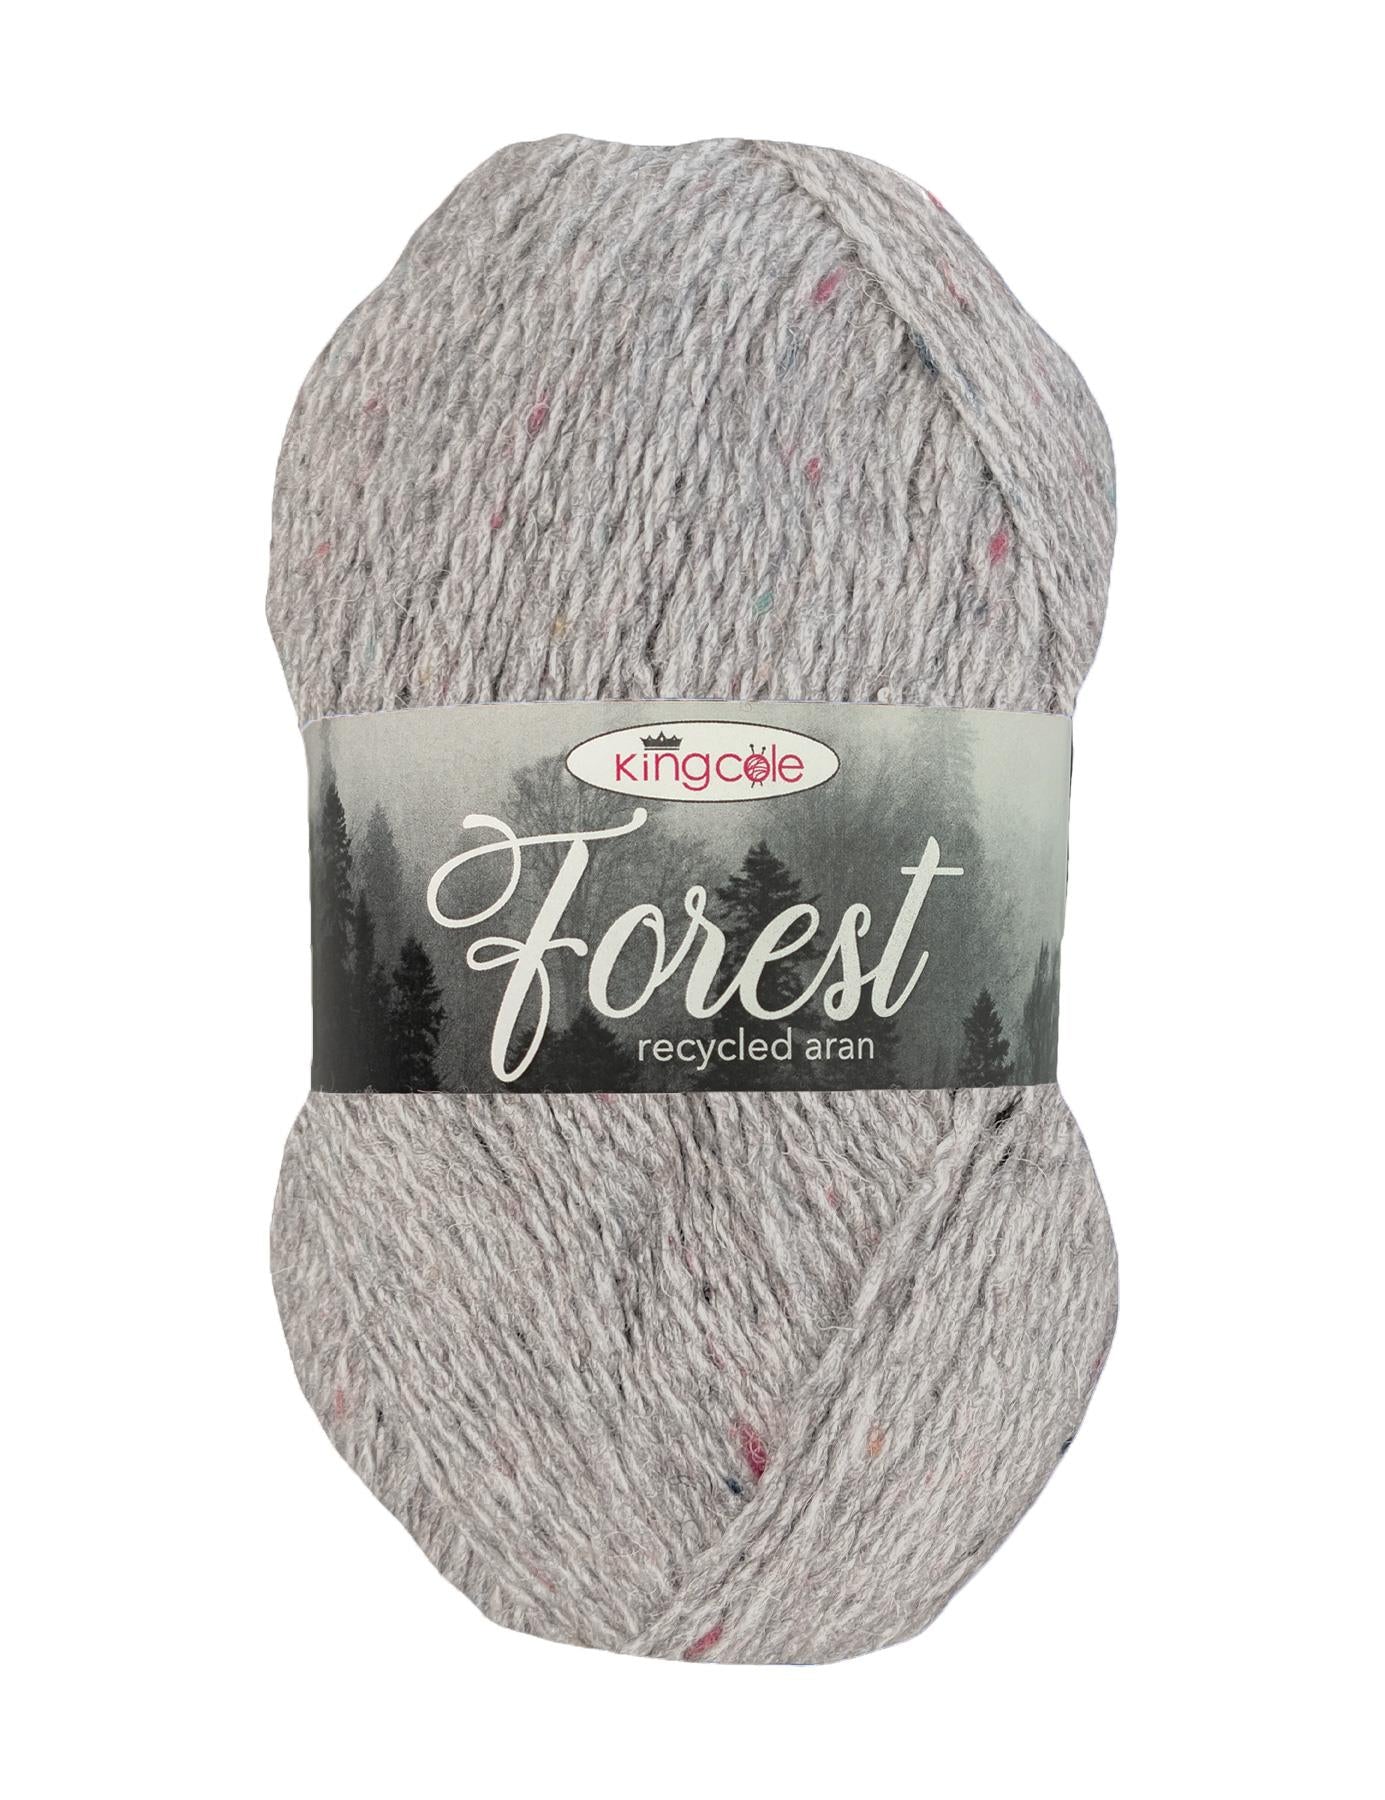 Forest Of Dean 100% recycled aran yarn by King Cole (100g)